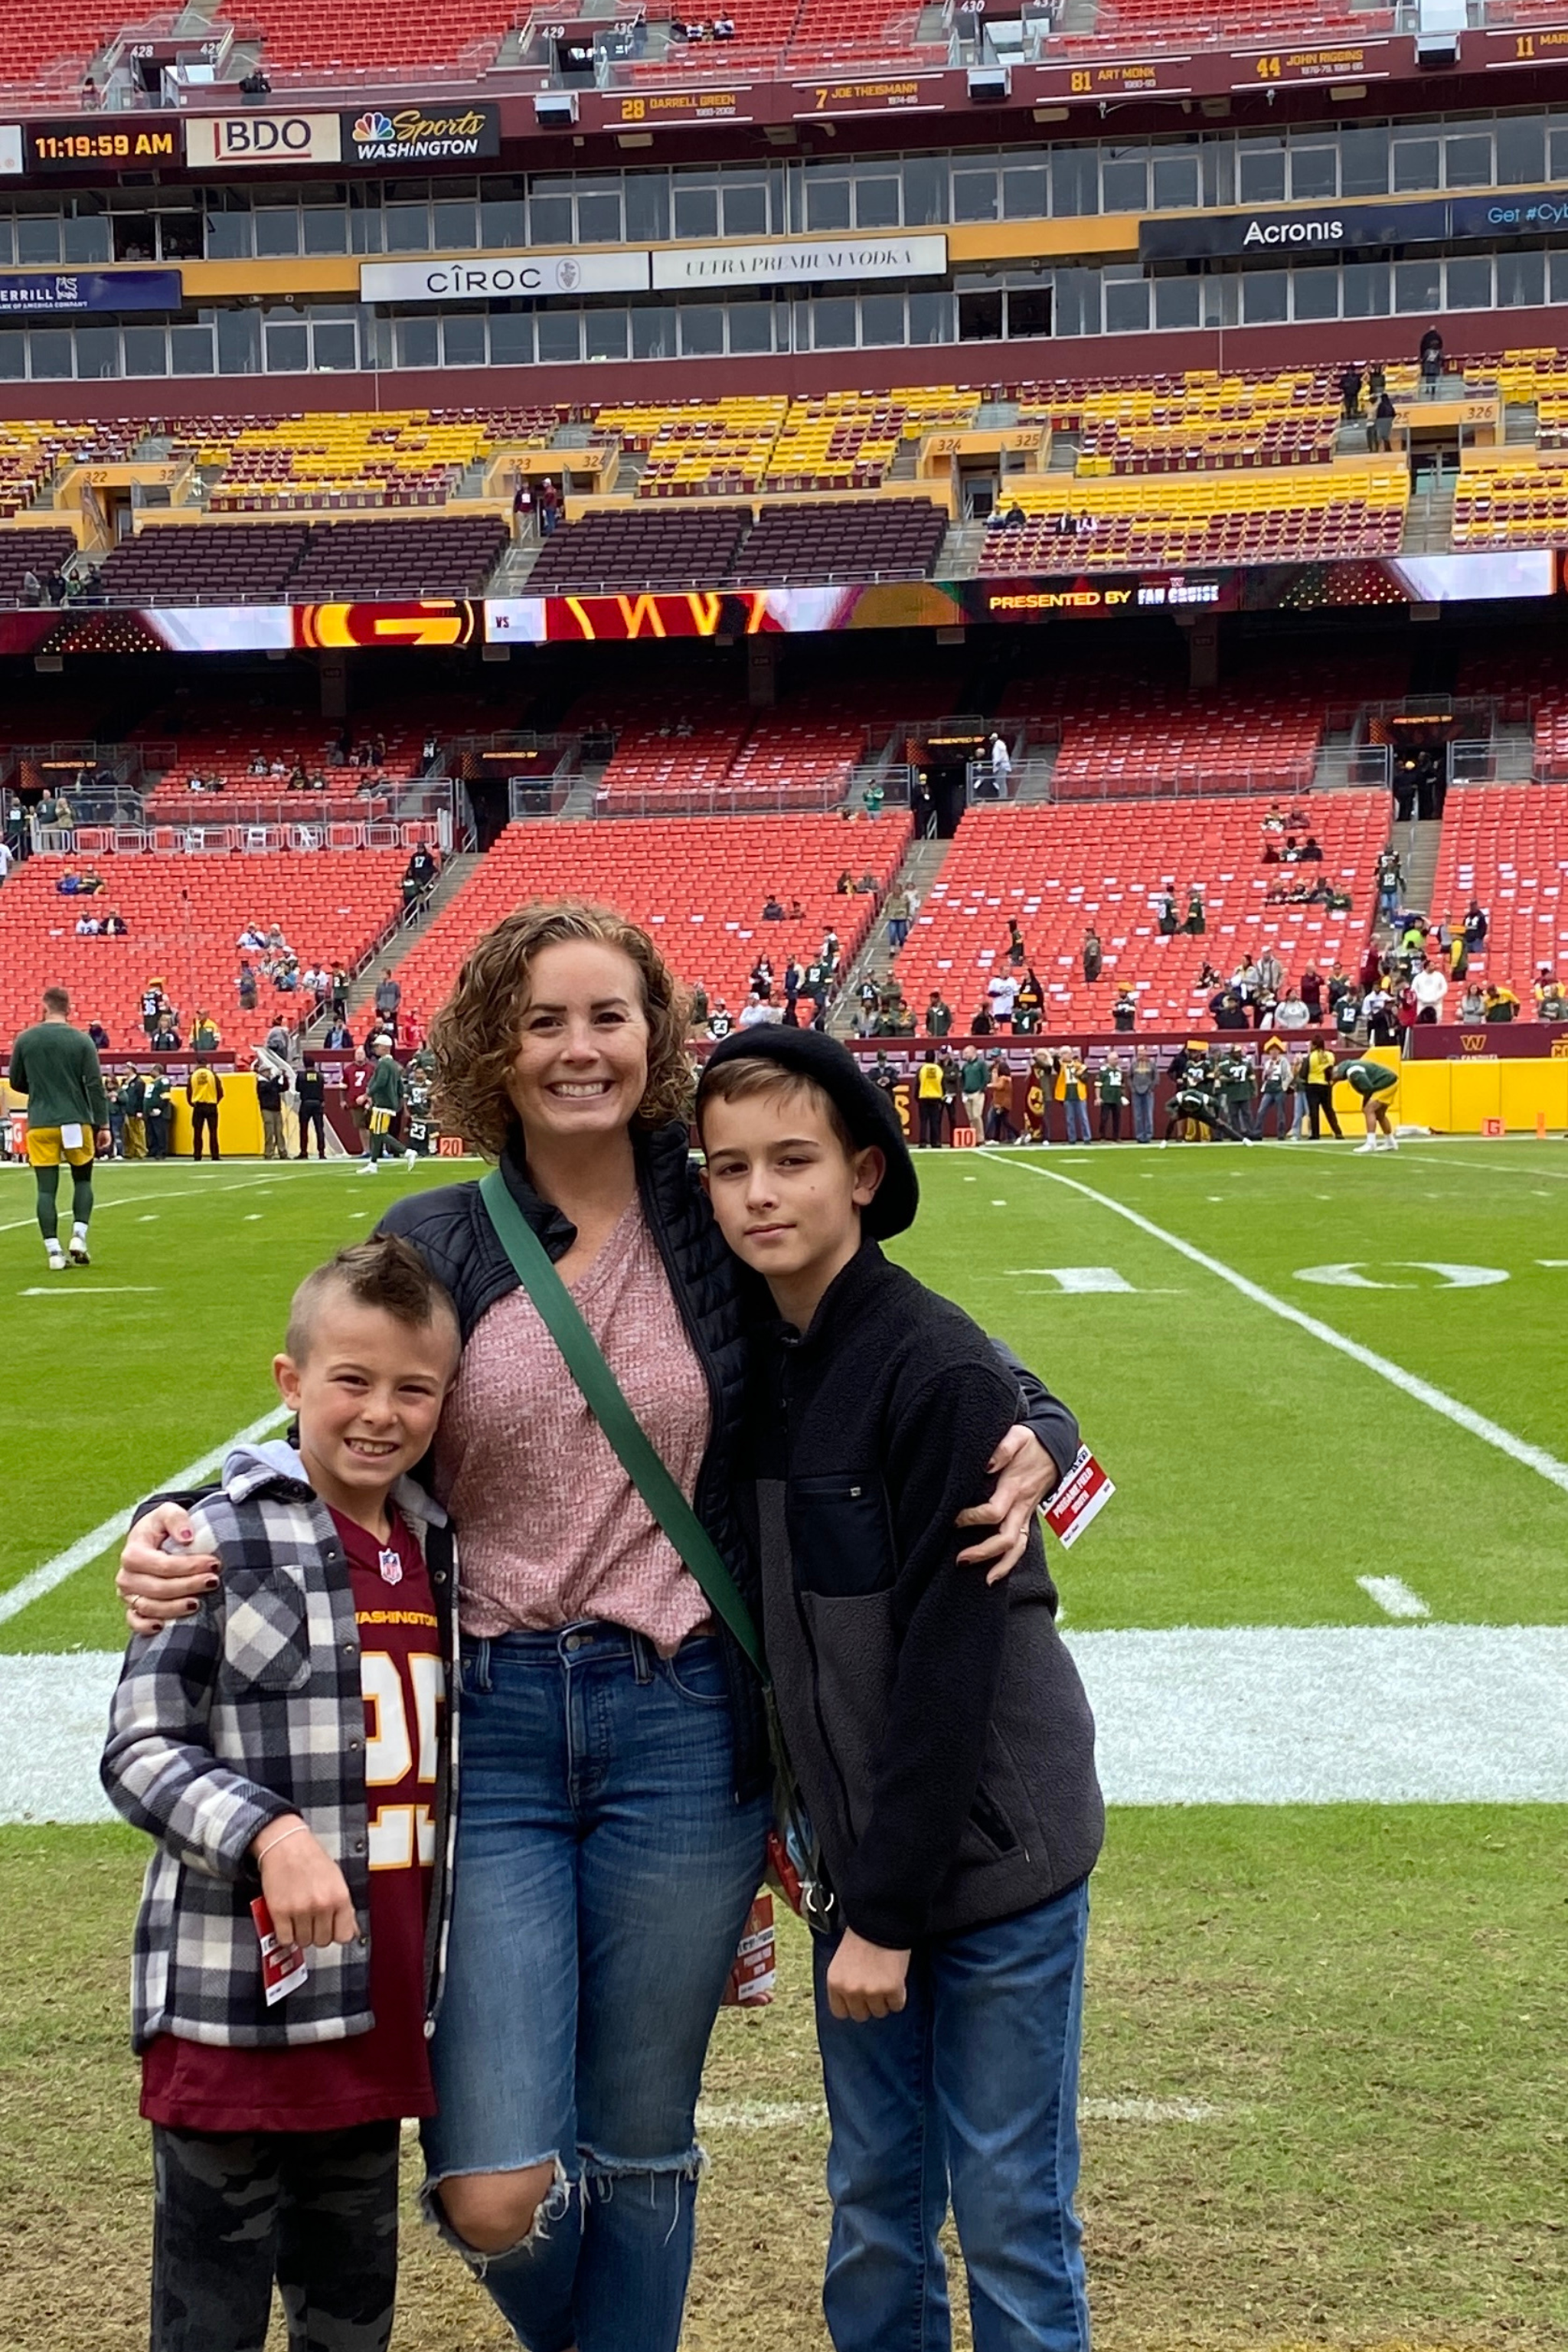 Maggie with his two boys standing in the Football field